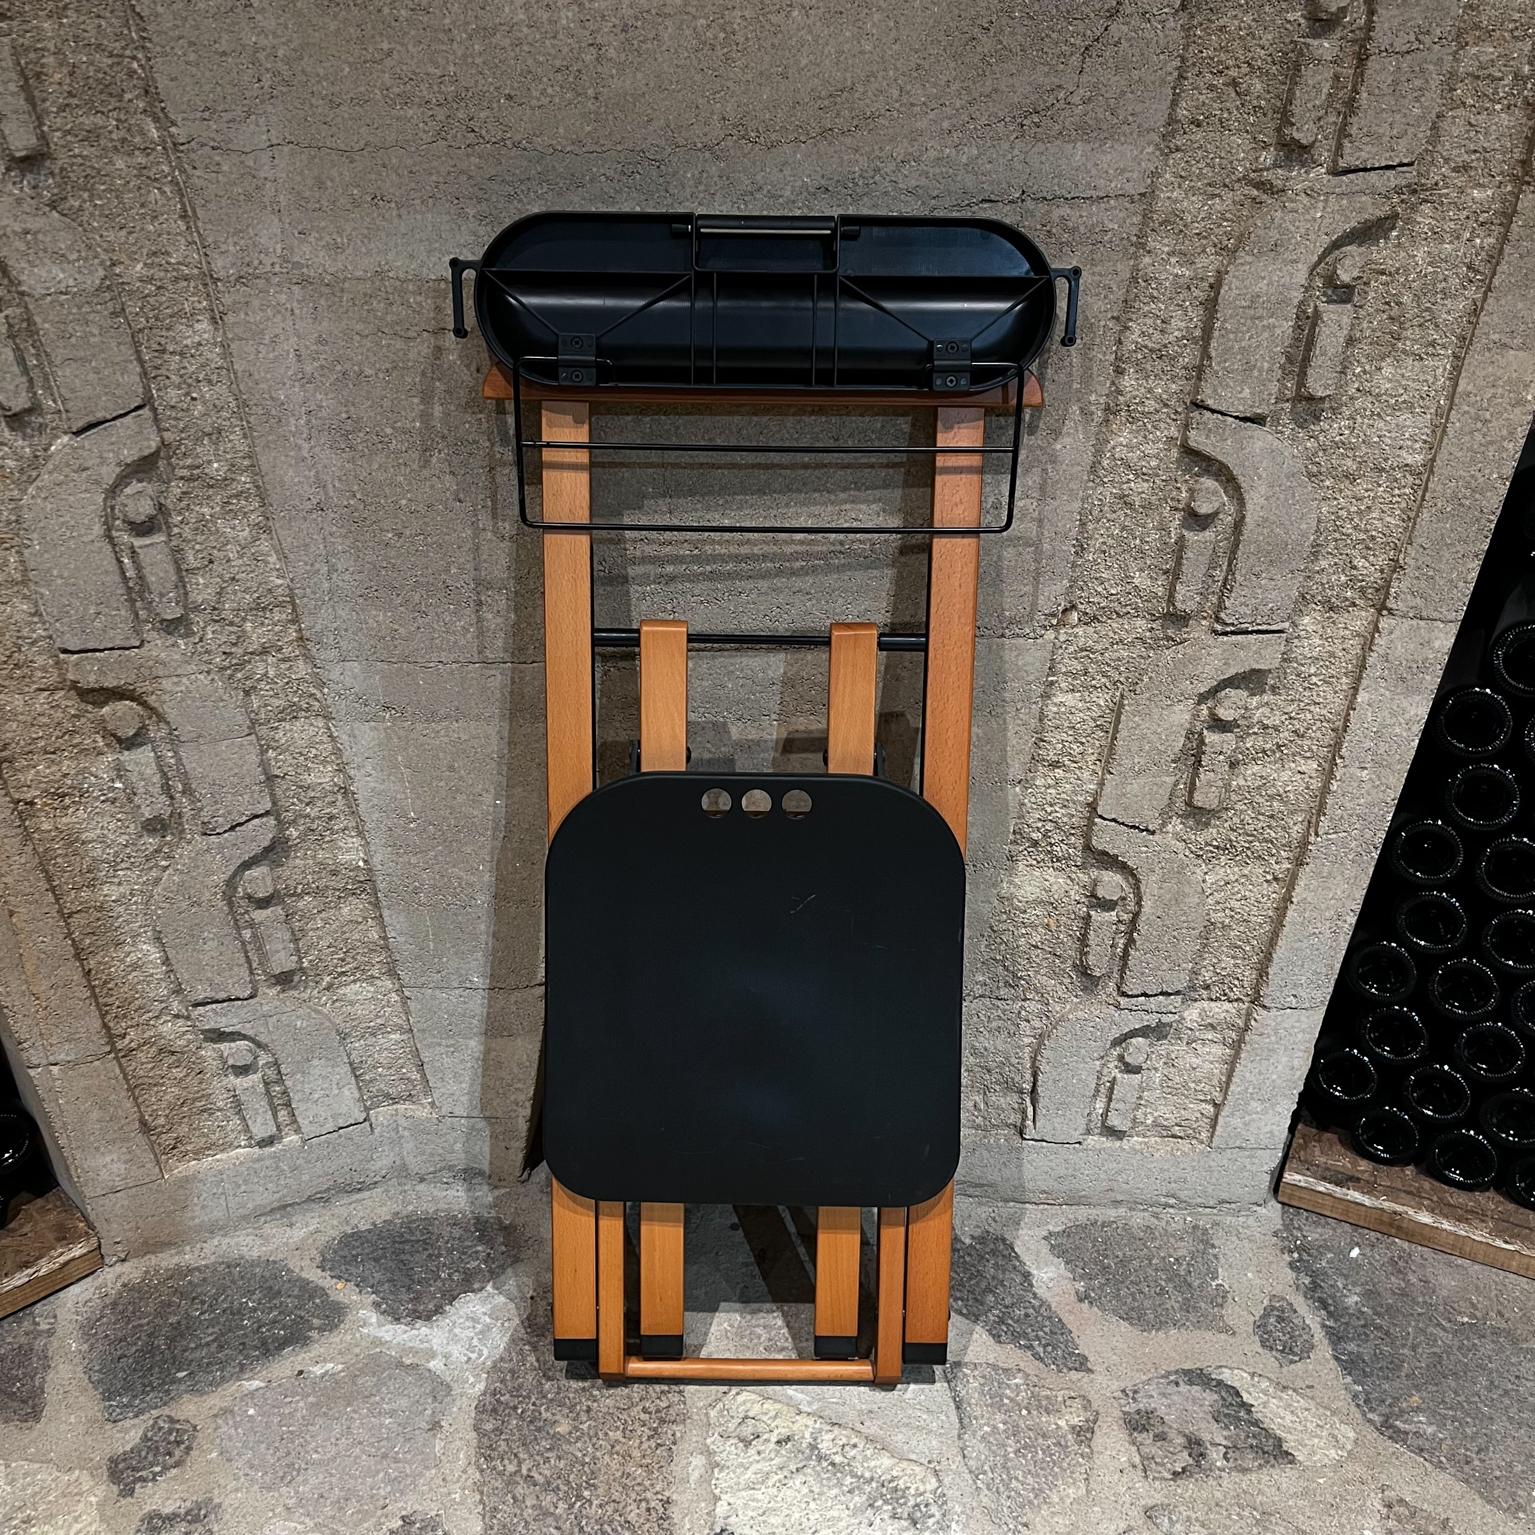 1990s Italy Foppapedretti Gentleman's folding valet with chair.
In the Style of Ico and Luisa Parisi
Chair can be folded into a very practical rectangular shape, which takes up hardly any space.
Very good vintage unrestored condition.
Label